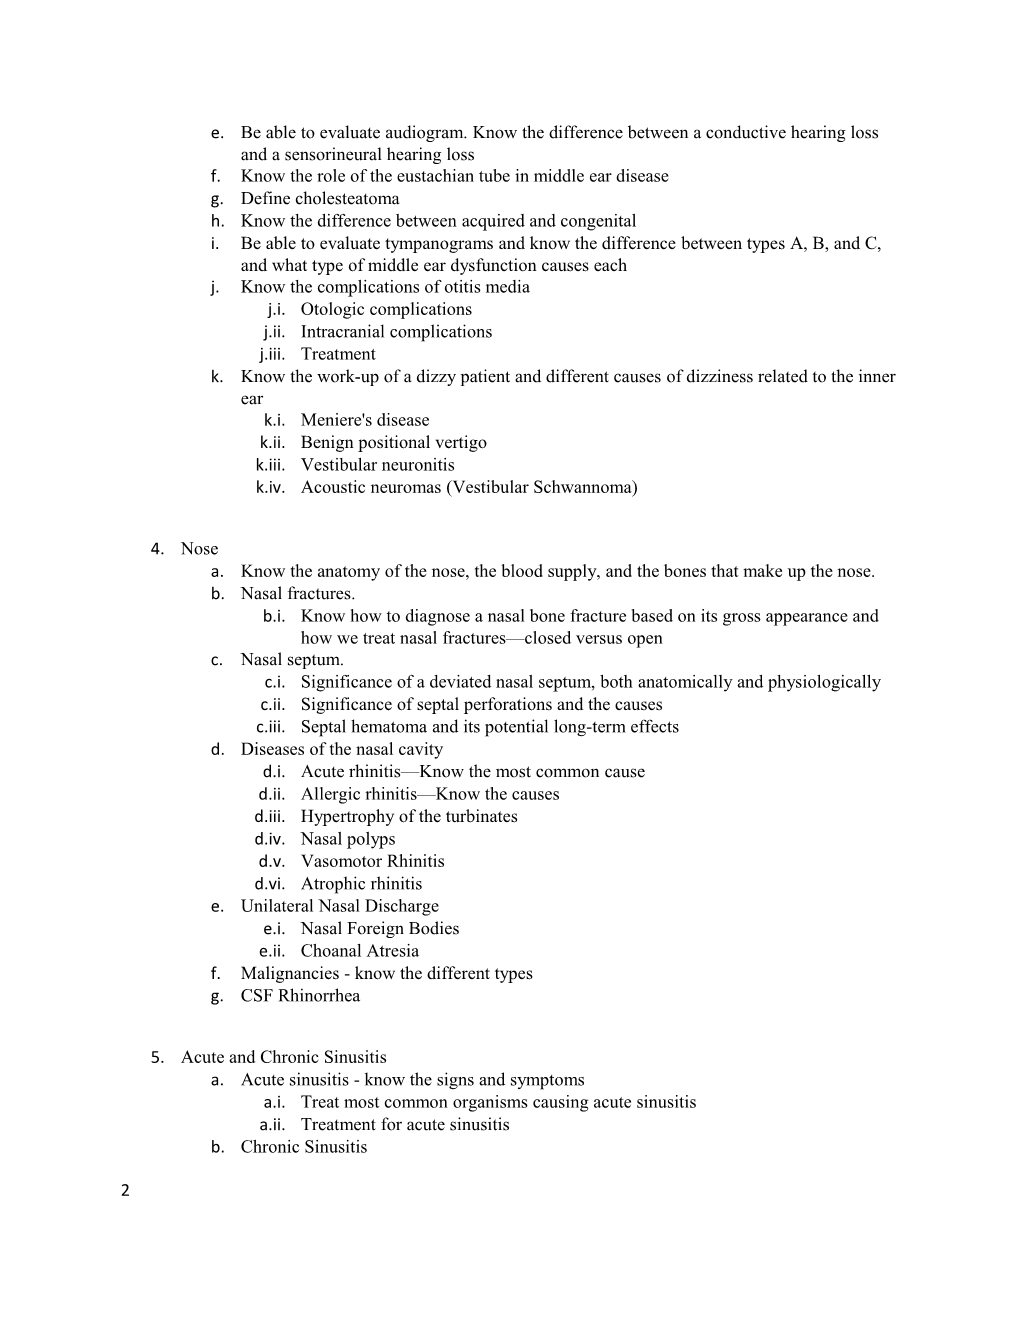 Otolaryngology/Facial Plastic Surgery Medical Student Rotation Syllabus and Resources